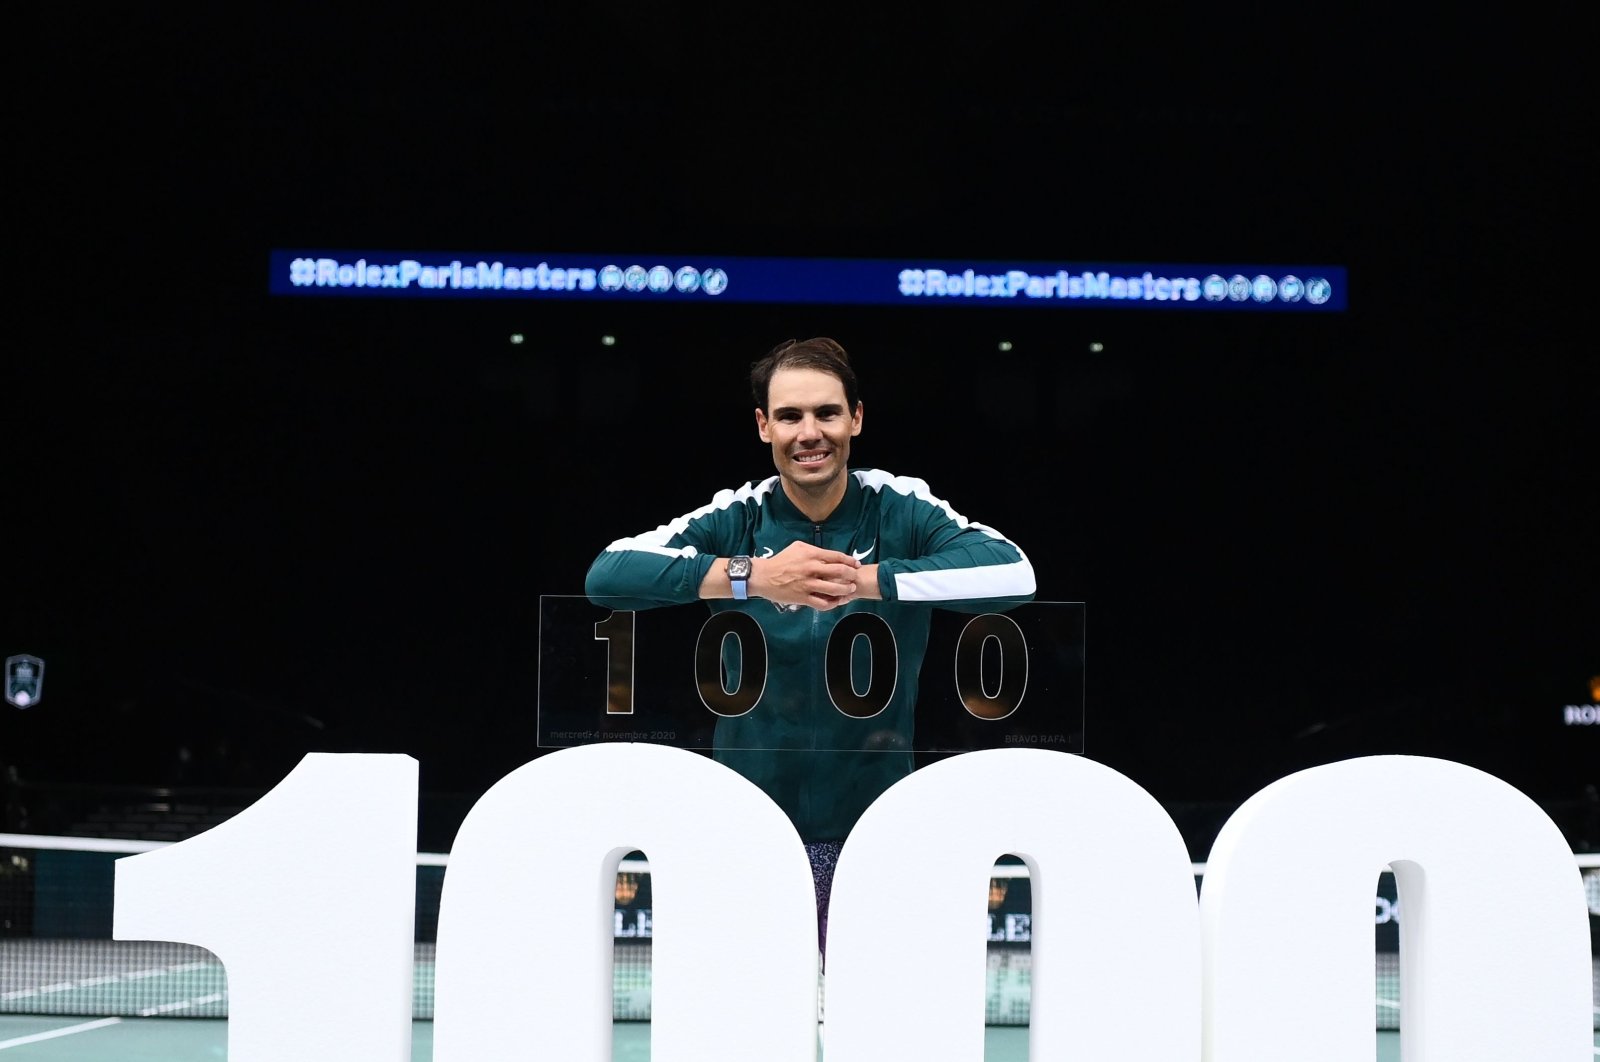 Rafael Nadal poses with the trophy for his 1,000th victory after the Paris Masters match against Feliciano Lopez, in Paris, France, Nov. 4, 2020. (AFP Photo)